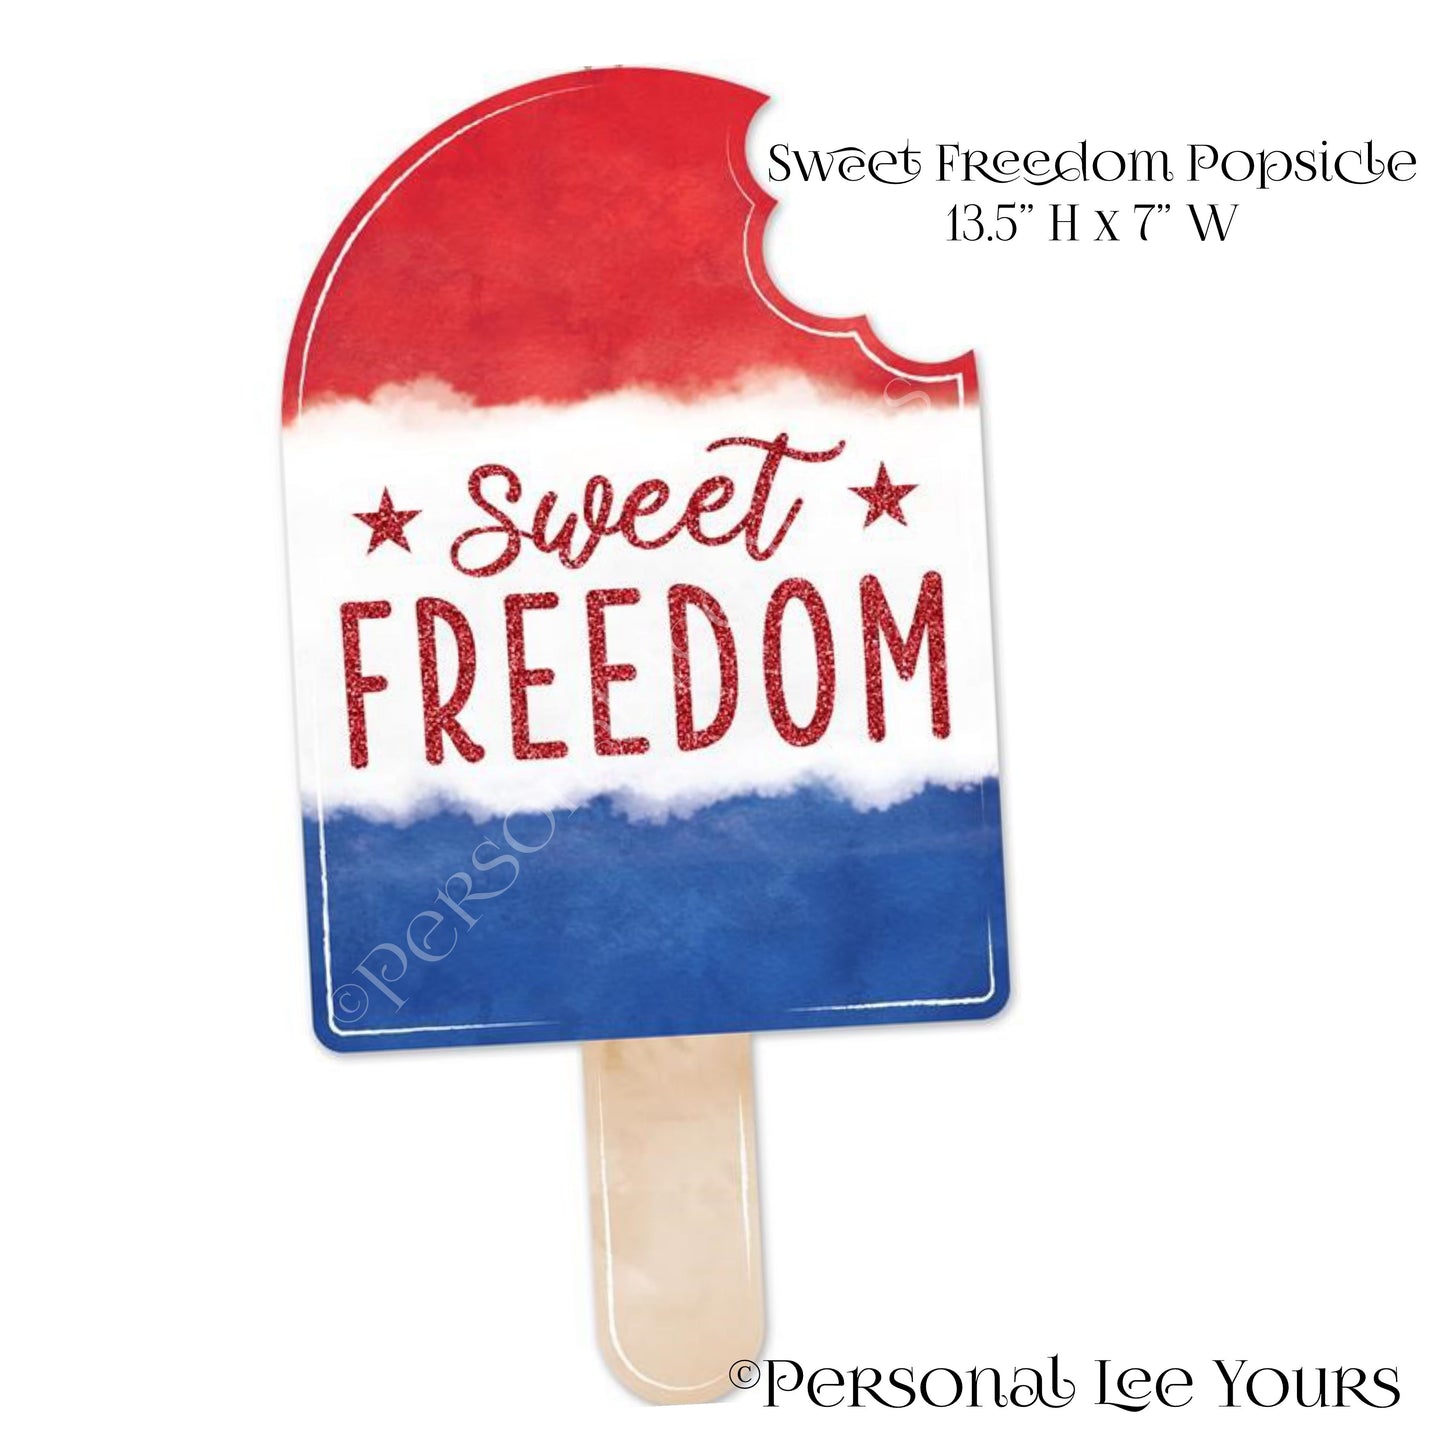 Wreath Accent * Sweet Freedom Popsicle * 13.5" H  x  7" W * Lightweight * AP8903